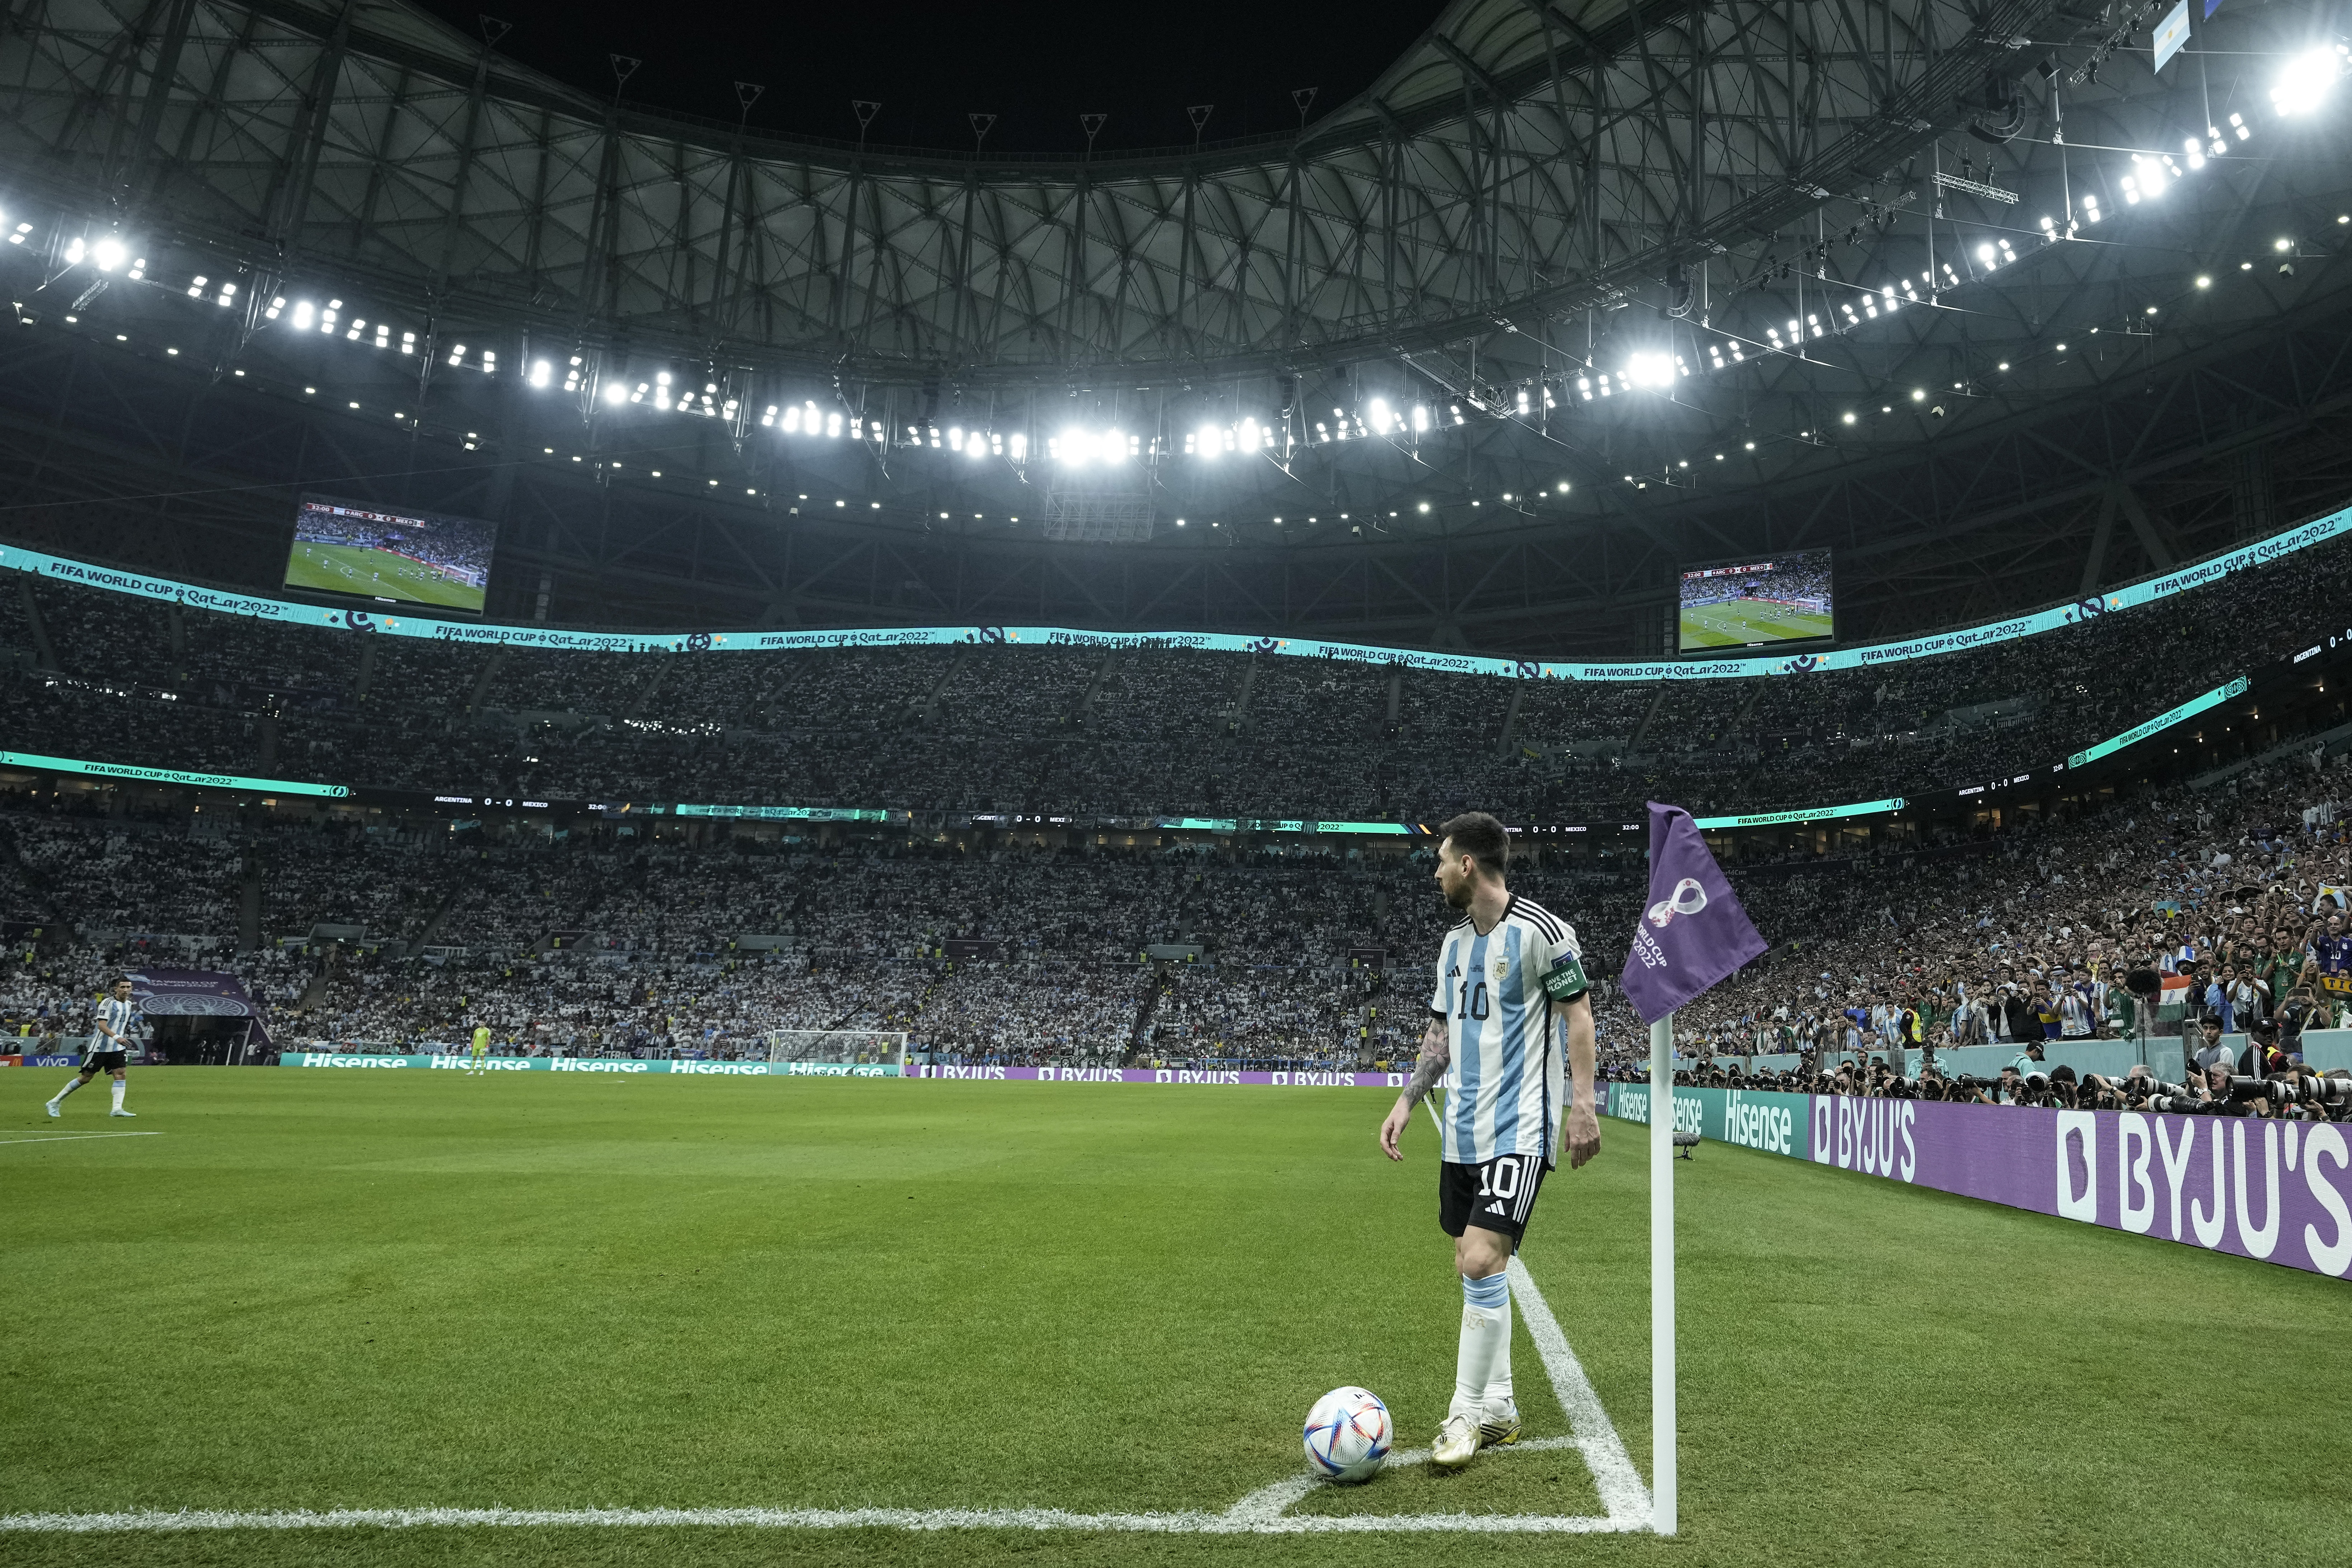 FIFA World Cup 2022: How to livestream Argentina vs France finals on TV,  Android and iOS mobile phones